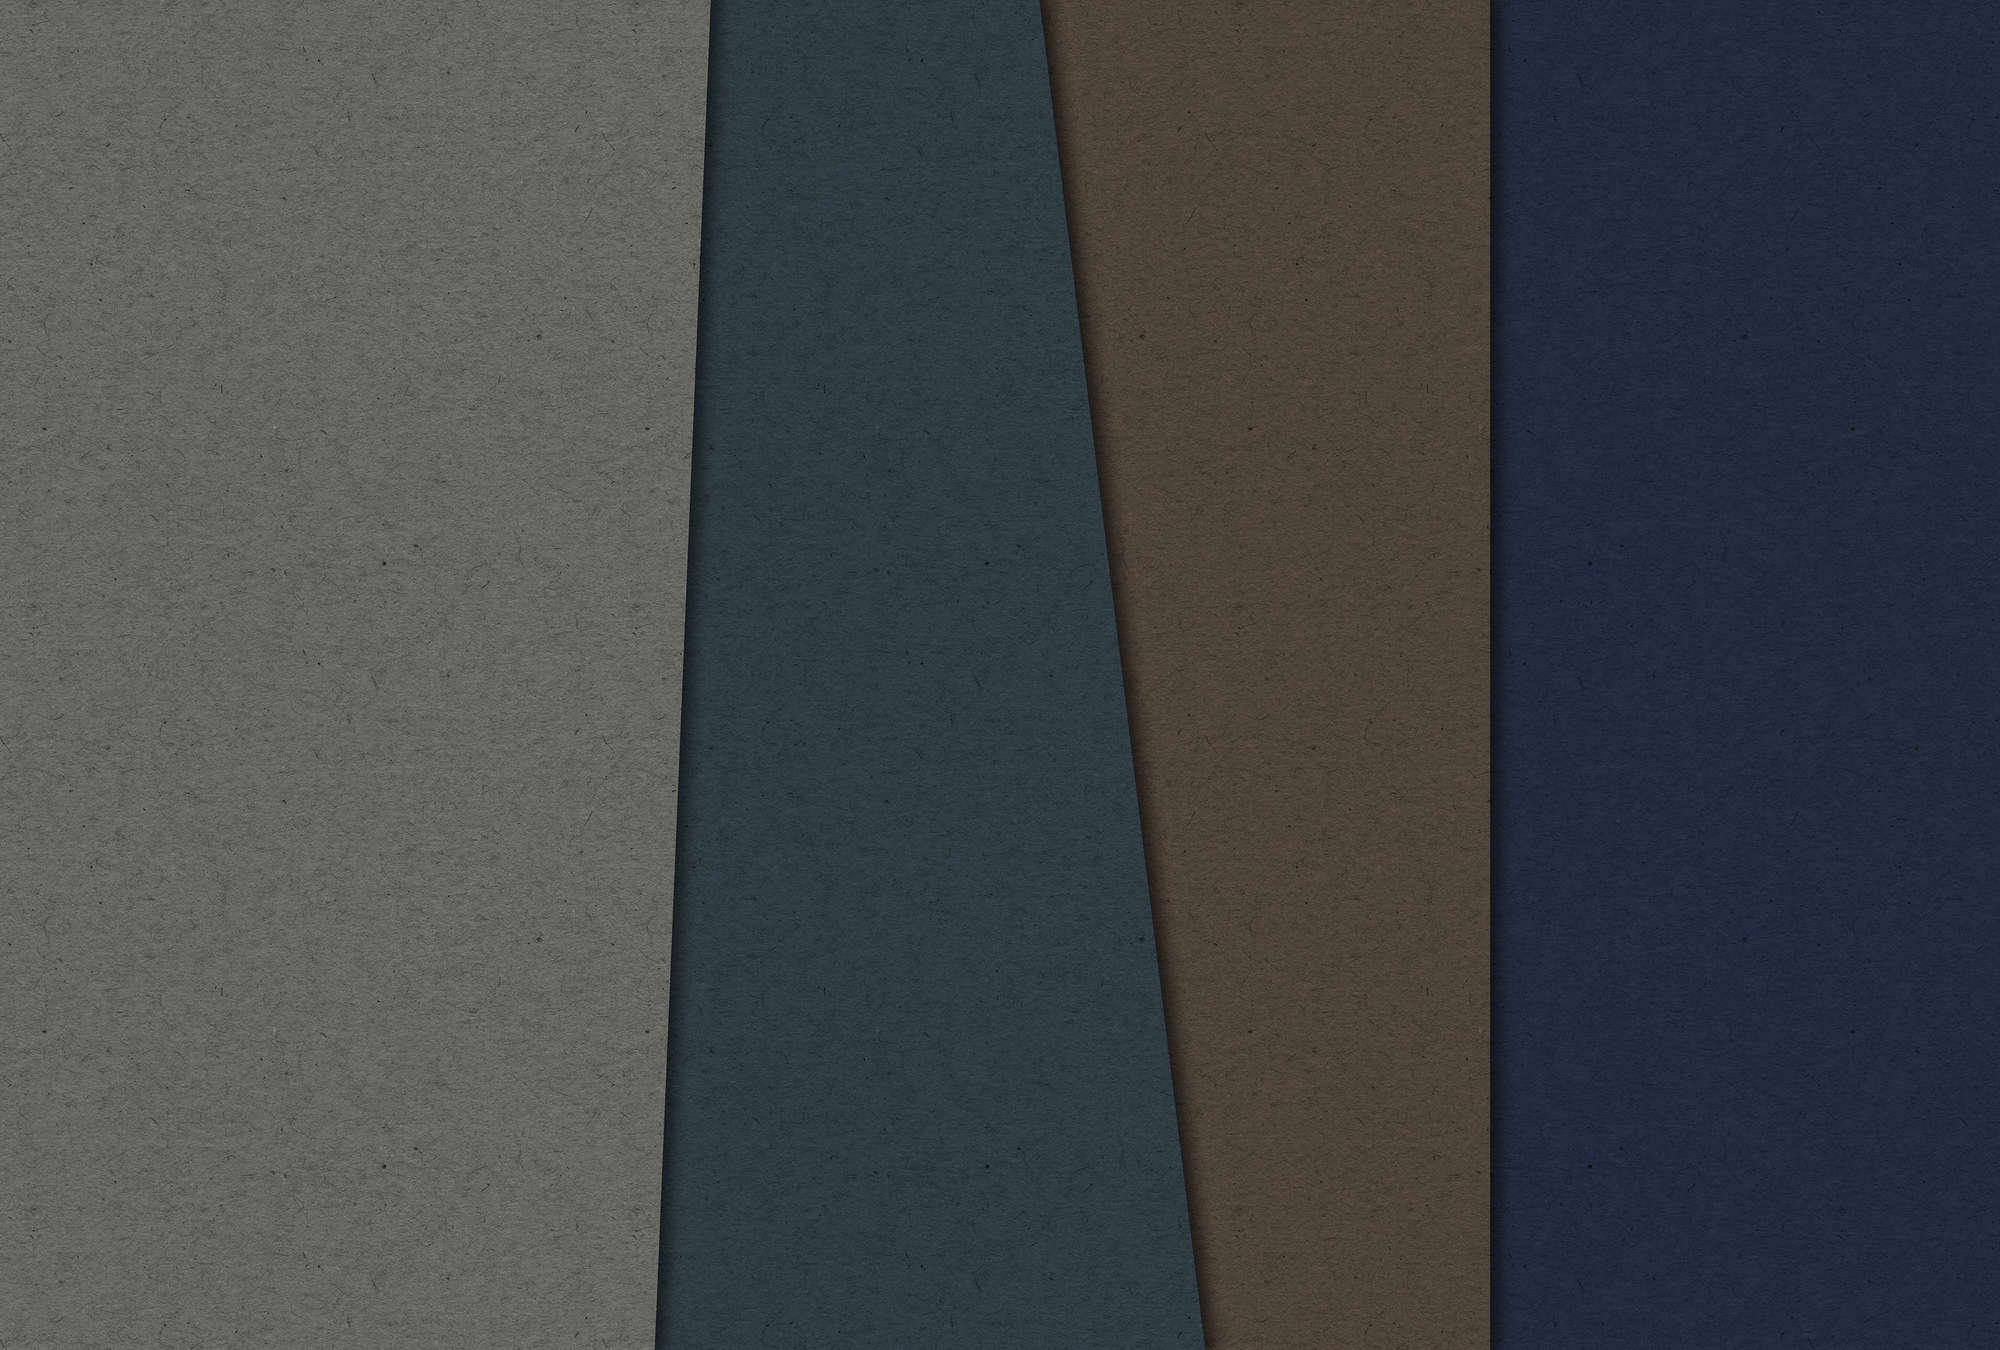             Layered Cardboard 2 - Photo wallpaper in cardboard structure with dark colour fields - Blue, Brown | Structure non-woven
        